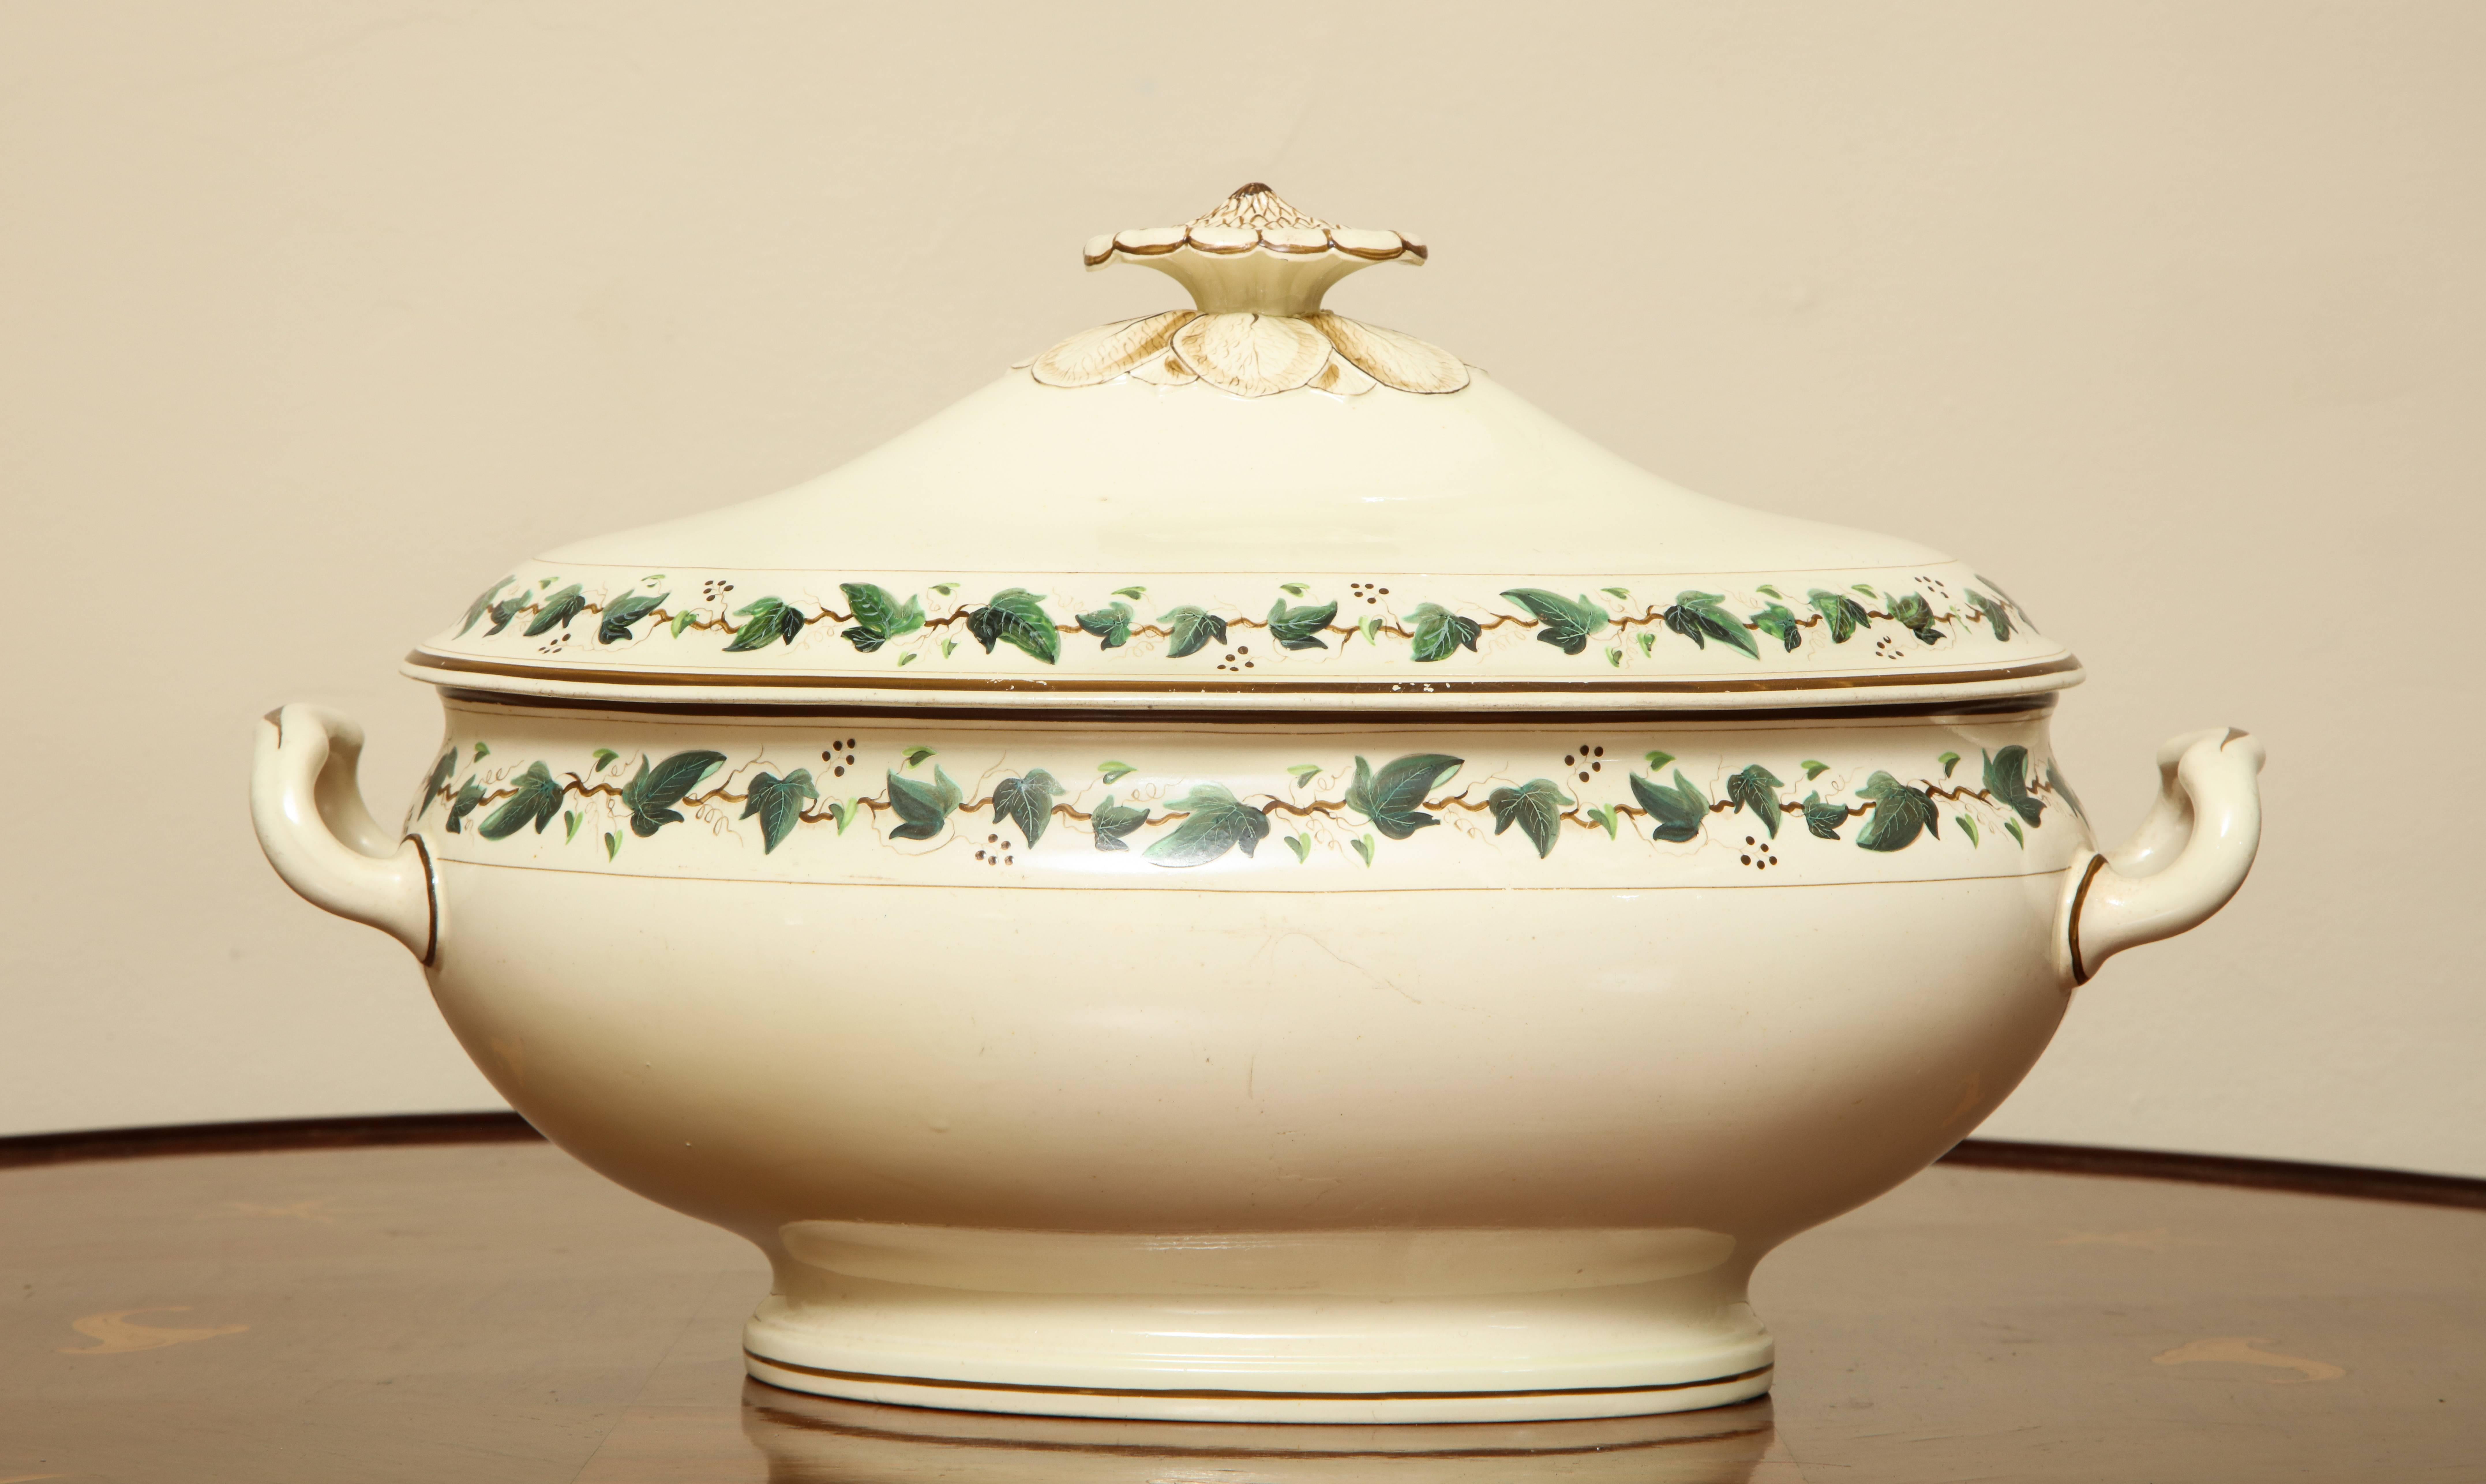 Wedgwood Creamware Covered Tureen with Ivy Decoration 3